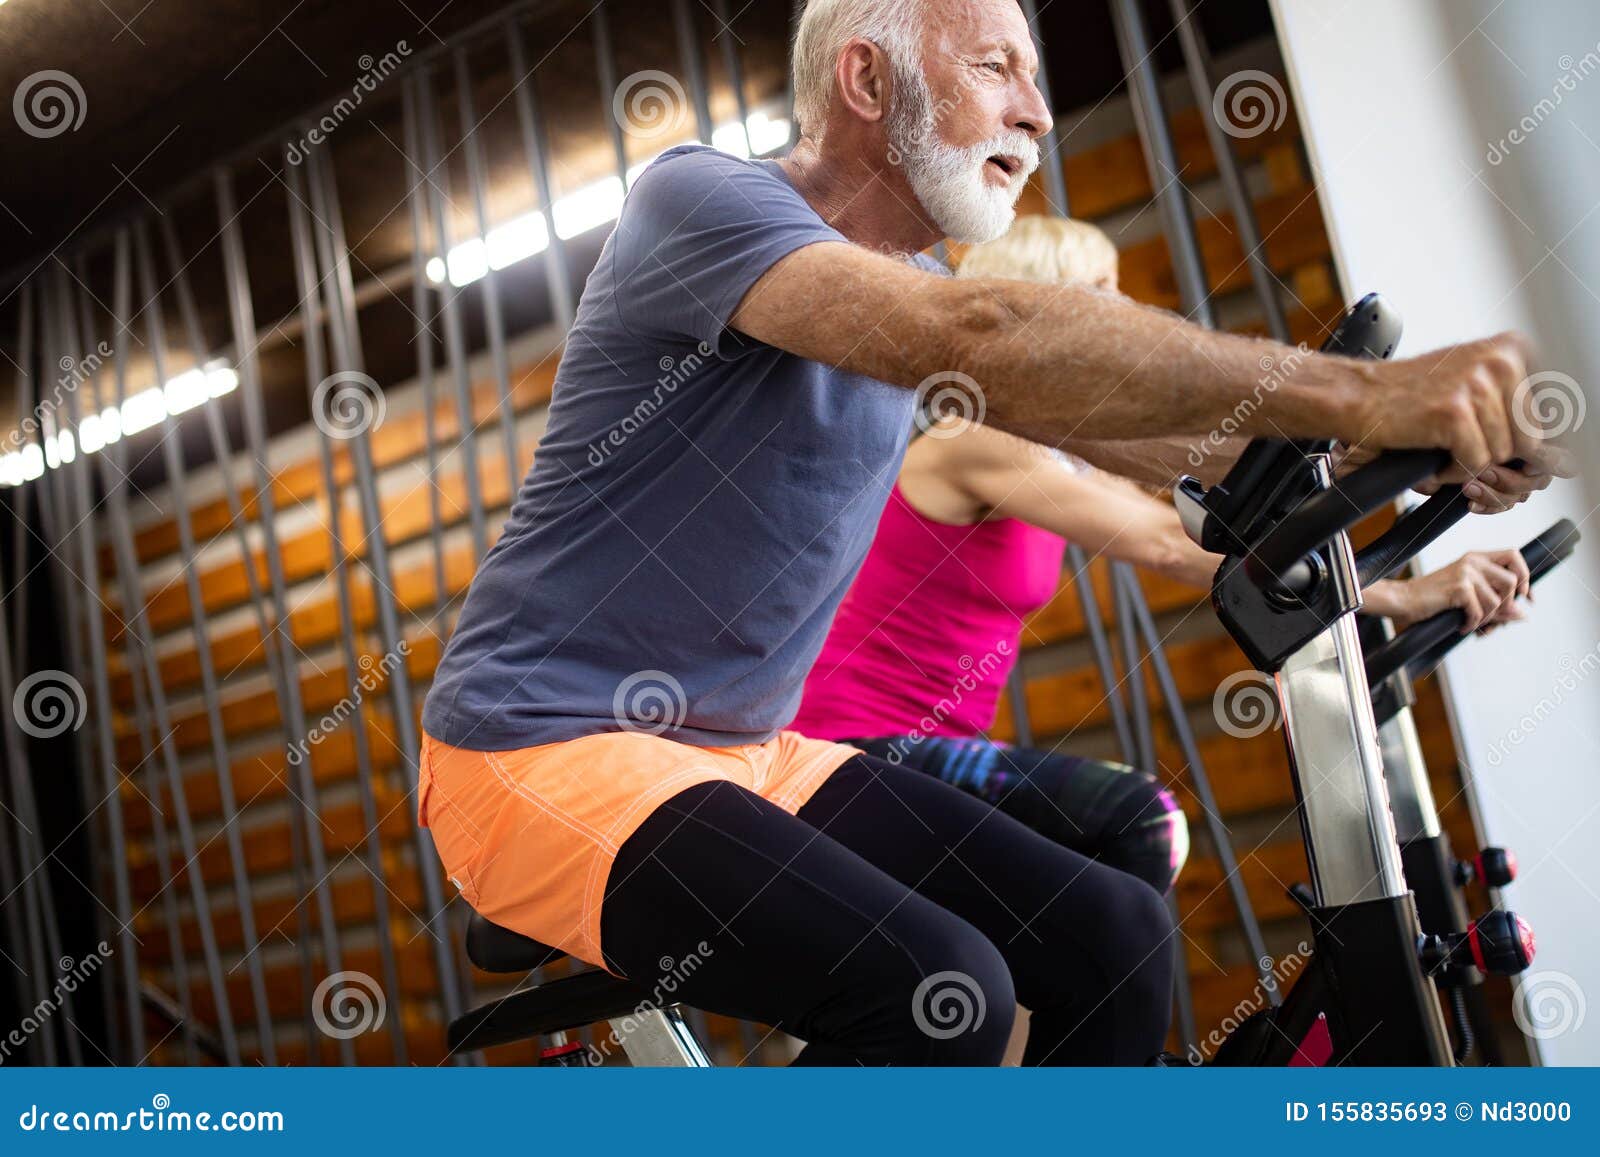 Happy Fit Mature Woman And Man Cycling On Exercise Bikes To Stay Healthy Stock Image Image Of